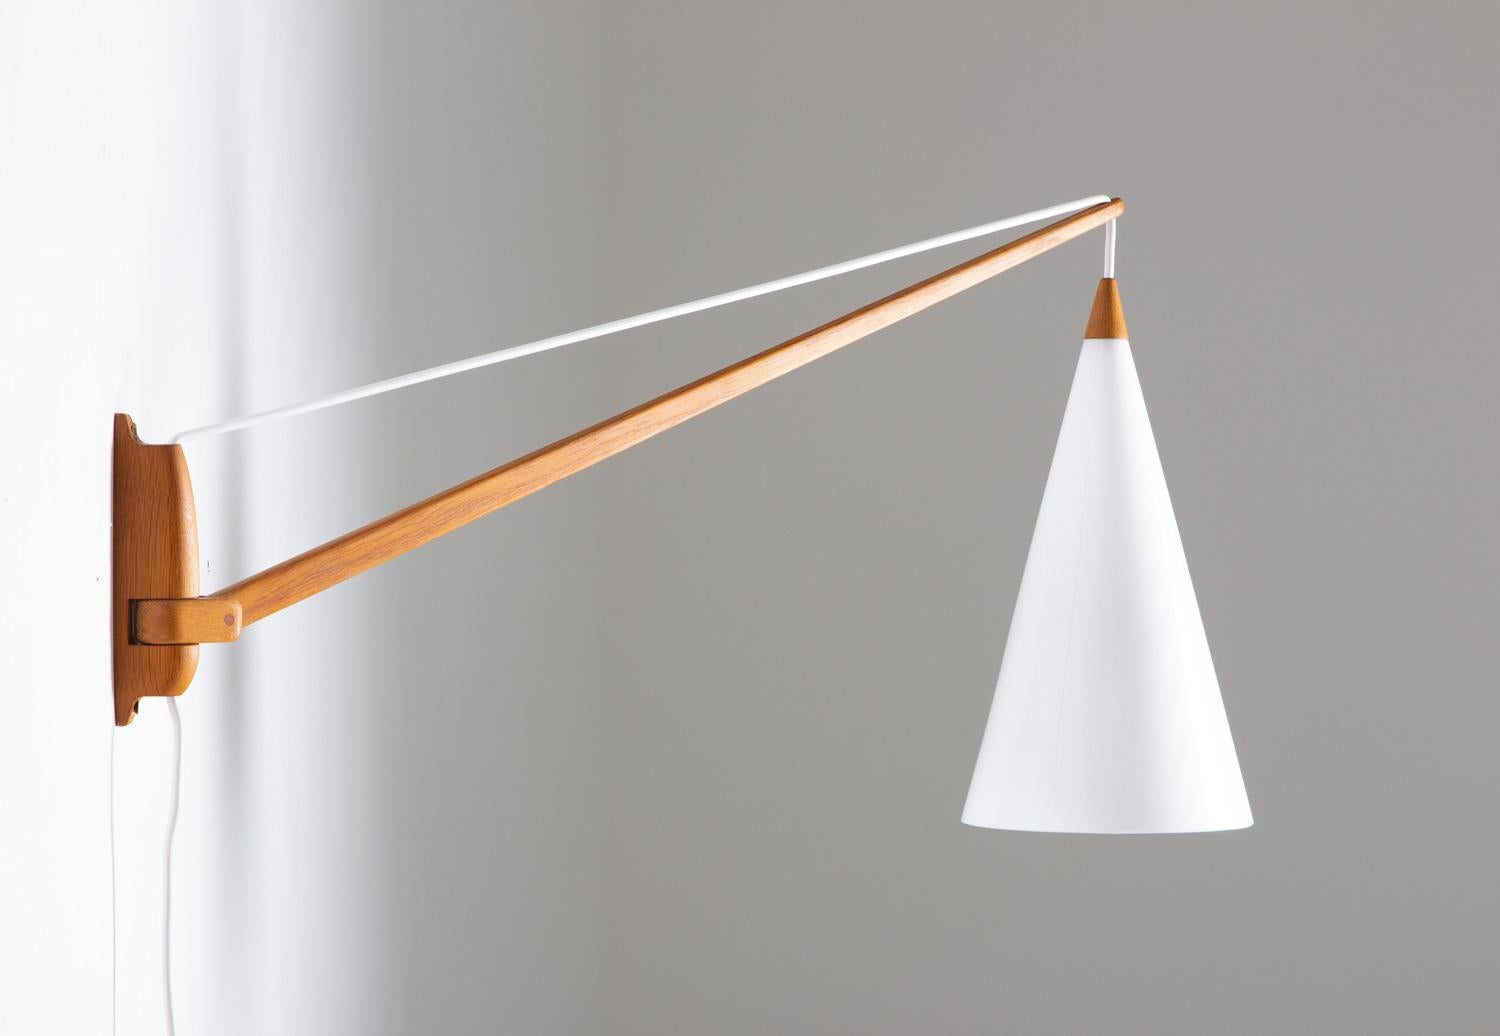 Rare midcentury Swedish swiveling wall lamp by Uno and Östen Kristiansson for Luxus, Sweden.
With its simplicity and fantastic details, this lamp is a perfect example of the high quality lamps that Luxus produced during this era. The whole lamp is